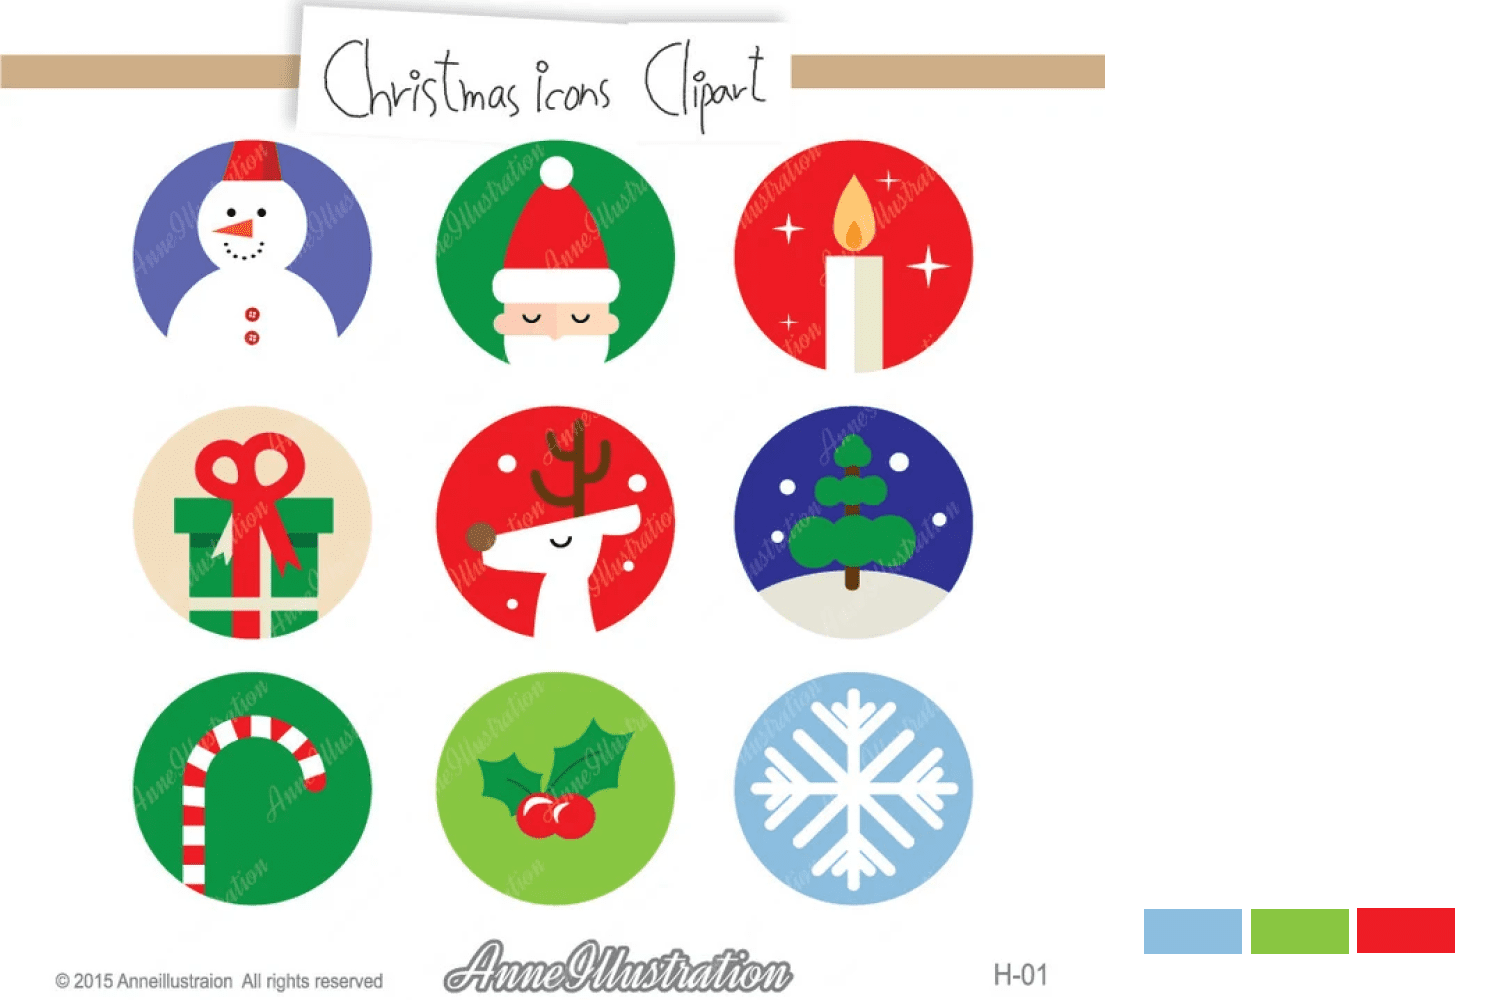 Collage with 9 Christmas icons of a rounded shape with Santa, Snowmen, tree, gift packs.